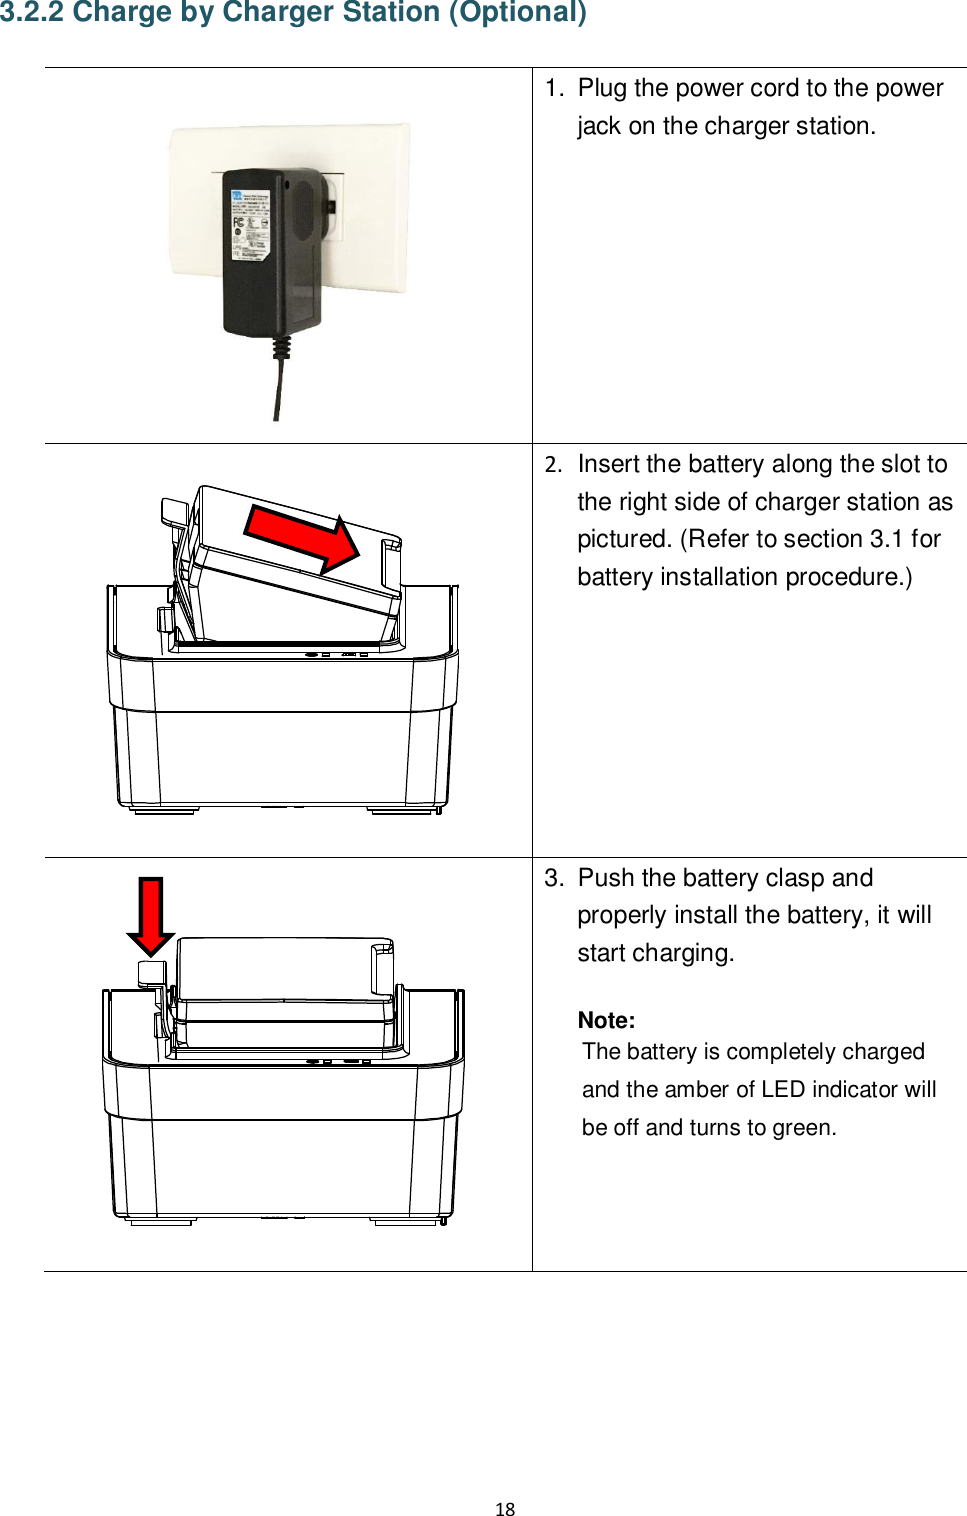 18  3.2.2 Charge by Charger Station (Optional)   1.  Plug the power cord to the power jack on the charger station.    2.  Insert the battery along the slot to the right side of charger station as pictured. (Refer to section 3.1 for battery installation procedure.)     3.  Push the battery clasp and properly install the battery, it will start charging.  Note: The battery is completely charged and the amber of LED indicator will be off and turns to green.   